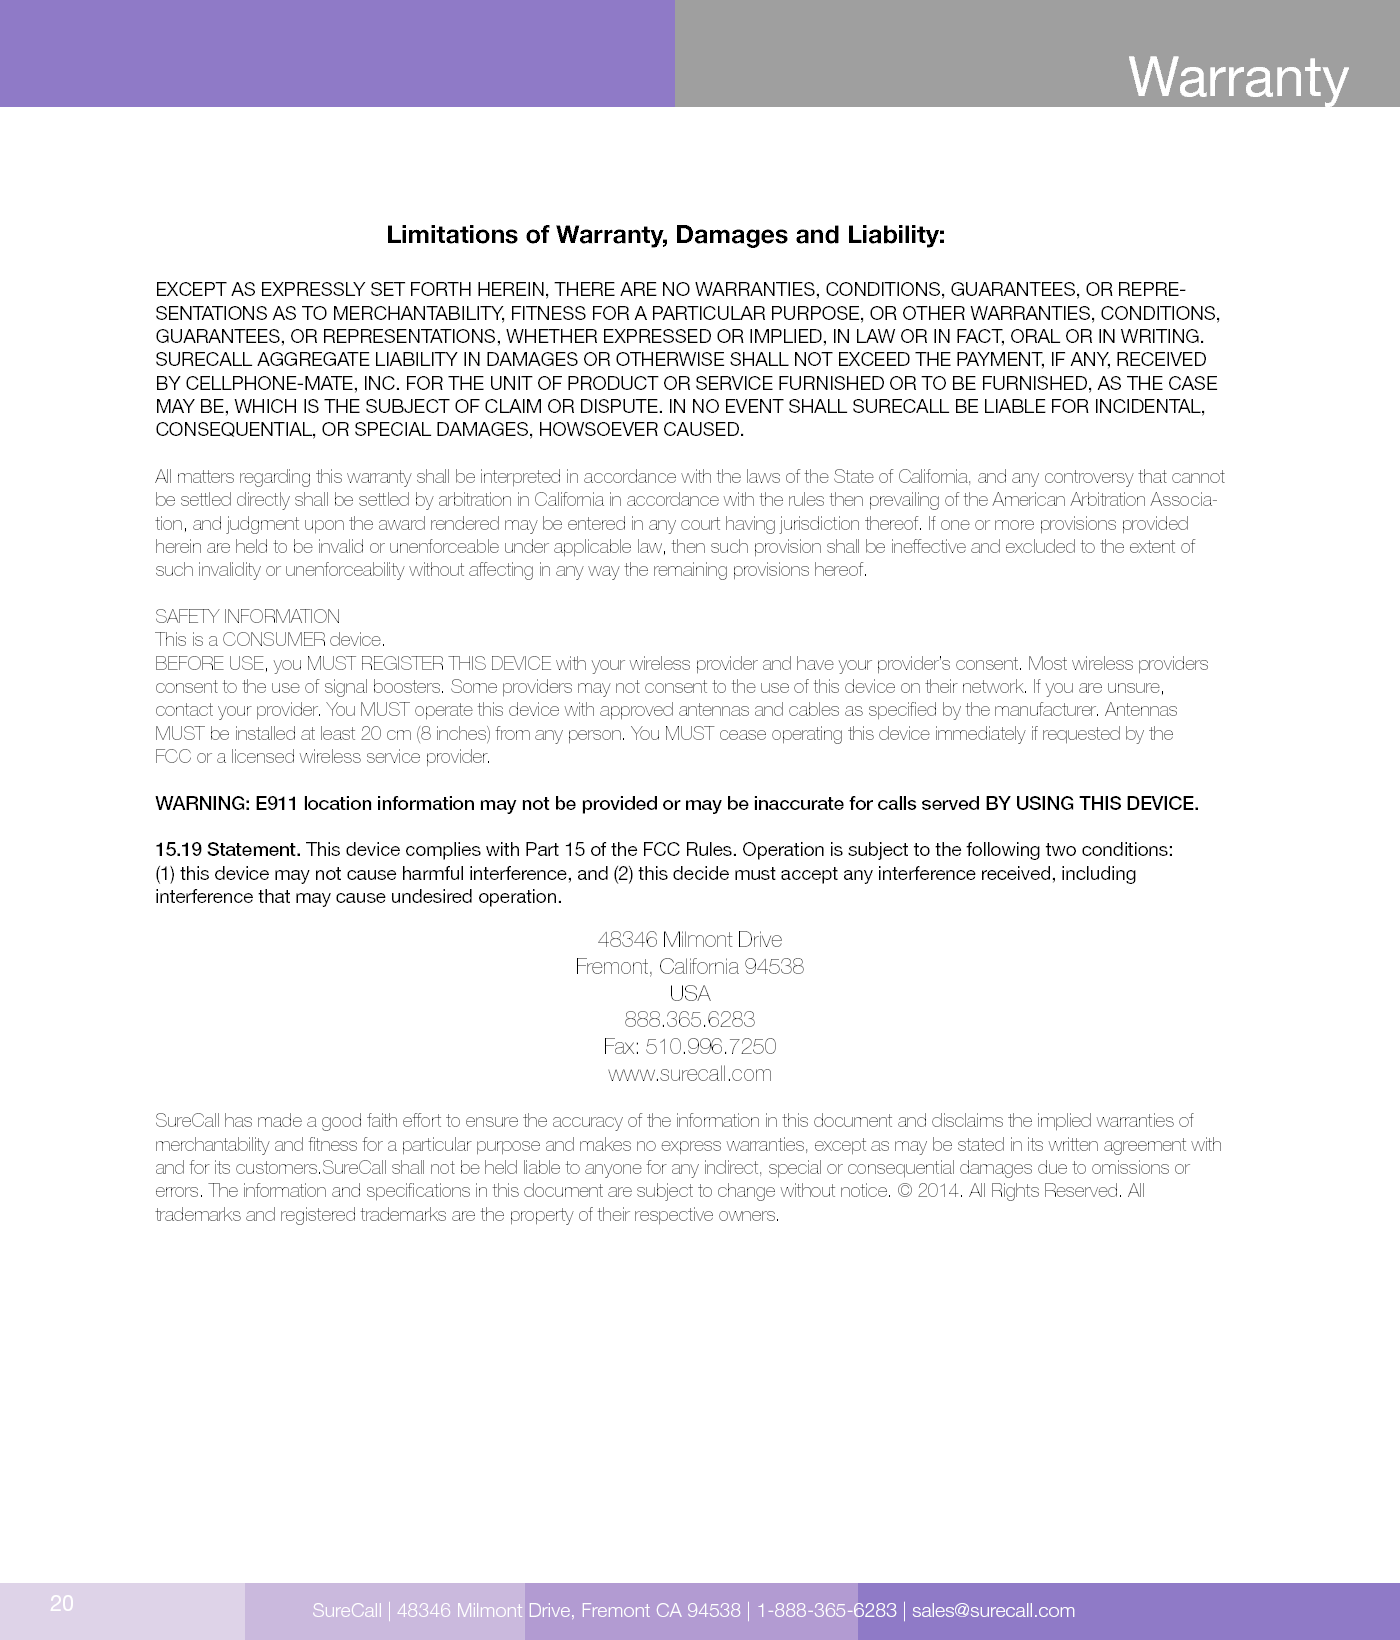 Limitations of Warranty, Damages and Liability:EXCEPT AS EXPRESSLY SET FORTH HEREIN, THERE ARE NO WARRANTIES, CONDITIONS, GUARANTEES, OR REPRE-SENTATIONS AS TO MERCHANTABILITY, FITNESS FOR A PARTICULAR PURPOSE, OR OTHER WARRANTIES, CONDITIONS, GUARANTEES, OR REPRESENTATIONS, WHETHER EXPRESSED OR IMPLIED, IN LAW OR IN FACT, ORAL OR IN WRITING.SURECALL AGGREGATE LIABILITY IN DAMAGES OR OTHERWISE SHALL NOT EXCEED THE PAYMENT, IF ANY, RECEIVED BY CELLPHONE-MATE, INC. FOR THE UNIT OF PRODUCT OR SERVICE FURNISHED OR TO BE FURNISHED, AS THE CASE MAY BE, WHICH IS THE SUBJECT OF CLAIM OR DISPUTE. IN NO EVENT SHALL SURECALL BE LIABLE FOR INCIDENTAL, CONSEQUENTIAL, OR SPECIAL DAMAGES, HOWSOEVER CAUSED. All matters regarding this warranty shall be interpreted in accordance with the laws of the State of California, and any controversy that cannot be settled directly shall be settled by arbitration in California in accordance with the rules then prevailing of the American Arbitration Associa-tion, and judgment upon the award rendered may be entered in any court having jurisdiction thereof. If one or more provisions provided herein are held to be invalid or unenforceable under applicable law, then such provision shall be ineective and excluded to the extent of such invalidity or unenforceability without aecting in any way the remaining provisions hereof.SAFETY INFORMATIONThis is a CONSUMER device.BEFORE USE, you MUST REGISTER THIS DEVICE with your wireless provider and have your provider’s consent. Most wireless providers consent to the use of signal boosters. Some providers may not consent to the use of this device on their network. If you are unsure,  contact your provider. You MUST operate this device with approved antennas and cables as specied by the manufacturer. Antennas MUST be installed at least 20 cm (8 inches) from any person. You MUST cease operating this device immediately if requested by the  FCC or a licensed wireless service provider.WARNING: E911 location information may not be provided or may be inaccurate for calls served BY USING THIS DEVICE.15.19 Statement. This device complies with Part 15 of the FCC Rules. Operation is subject to the following two conditions:  (1) this device may not cause harmful interference, and (2) this decide must accept any interference received, including  interference that may cause undesired operation.48346 Milmont DriveFremont, California 94538USA888.365.6283Fax: 510.996.7250www.surecall.comSureCall has made a good faith eort to ensure the accuracy of the information in this document and disclaims the implied warranties of merchantability and tness for a particular purpose and makes no express warranties, except as may be stated in its written agreement with and for its customers.SureCall shall not be held liable to anyone for any indirect, special or consequential damages due to omissions or  errors. The information and specications in this document are subject to change without notice. © 2014. All Rights Reserved. All  trademarks and registered trademarks are the property of their respective owners.20WarrantySureCall | 48346 Milmont Drive, Fremont CA 94538 | 1-888-365-6283 | sales@surecall.com